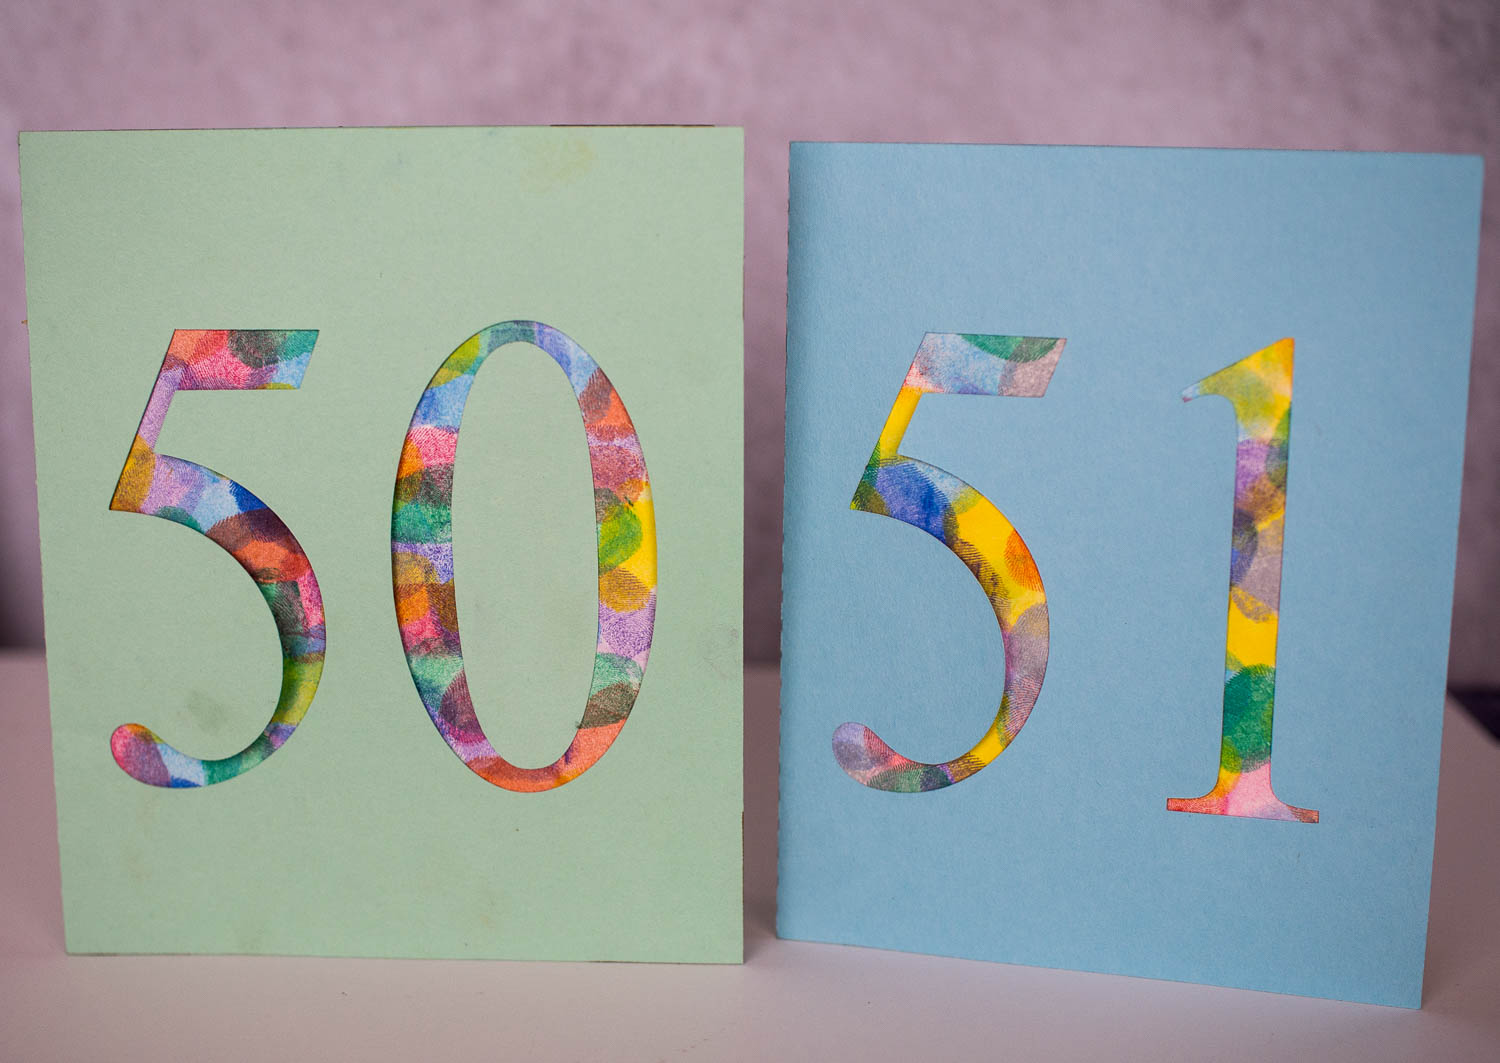 Thumbprint Birthday Cards - These cute cards are made by cutting out numbers and decorating the cut outs with thumbprints.  A cute way to personalize a card!